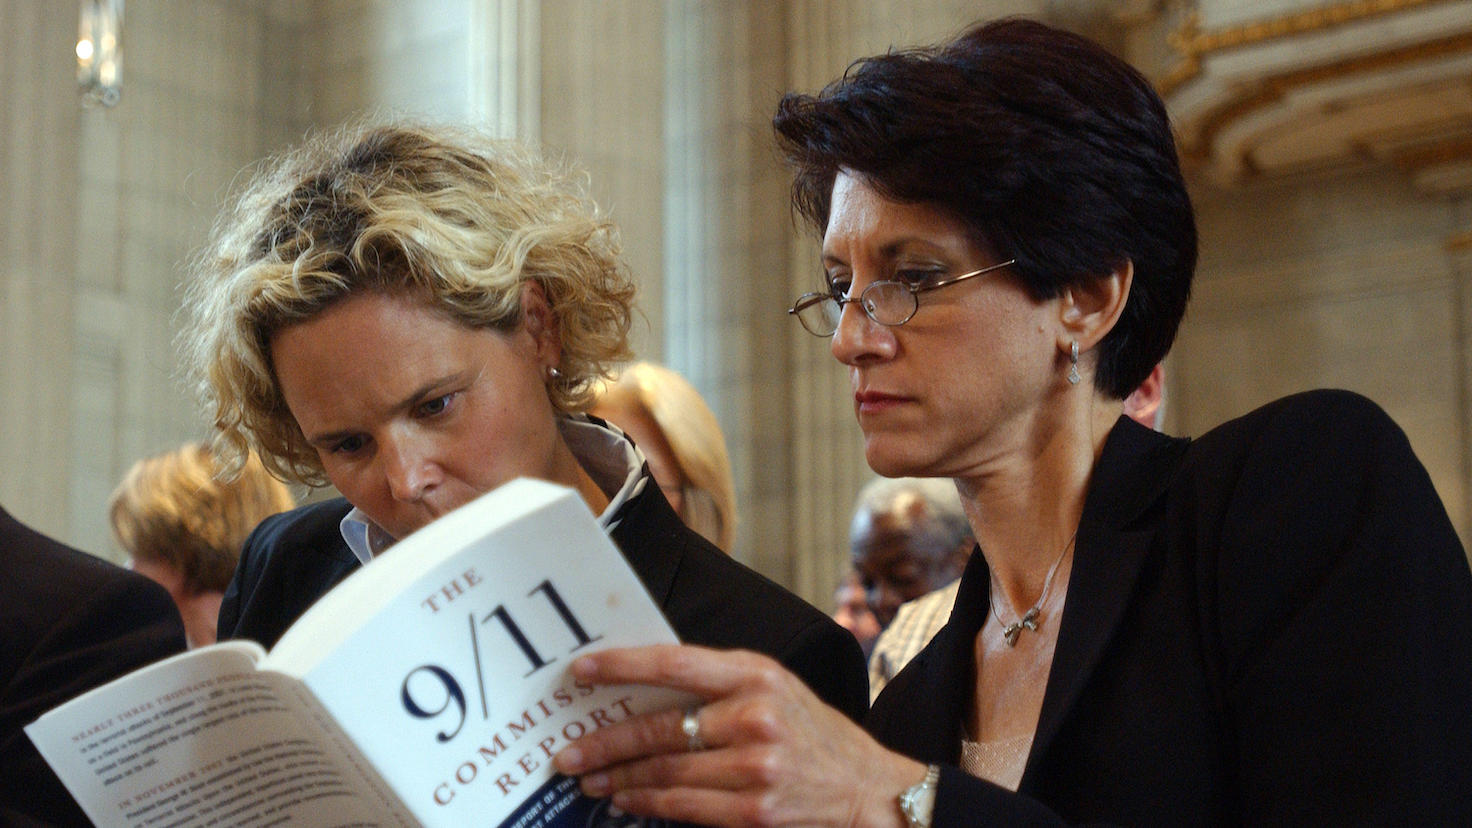 Kristen Breitweiser, left, and Lorie Van Auken look over the 9/11 report during a news conference to discuss the 9/11 Commission final report which was released on July 22, 2004, in Washington. (UPI Photo/Roger L. Wollenberg)